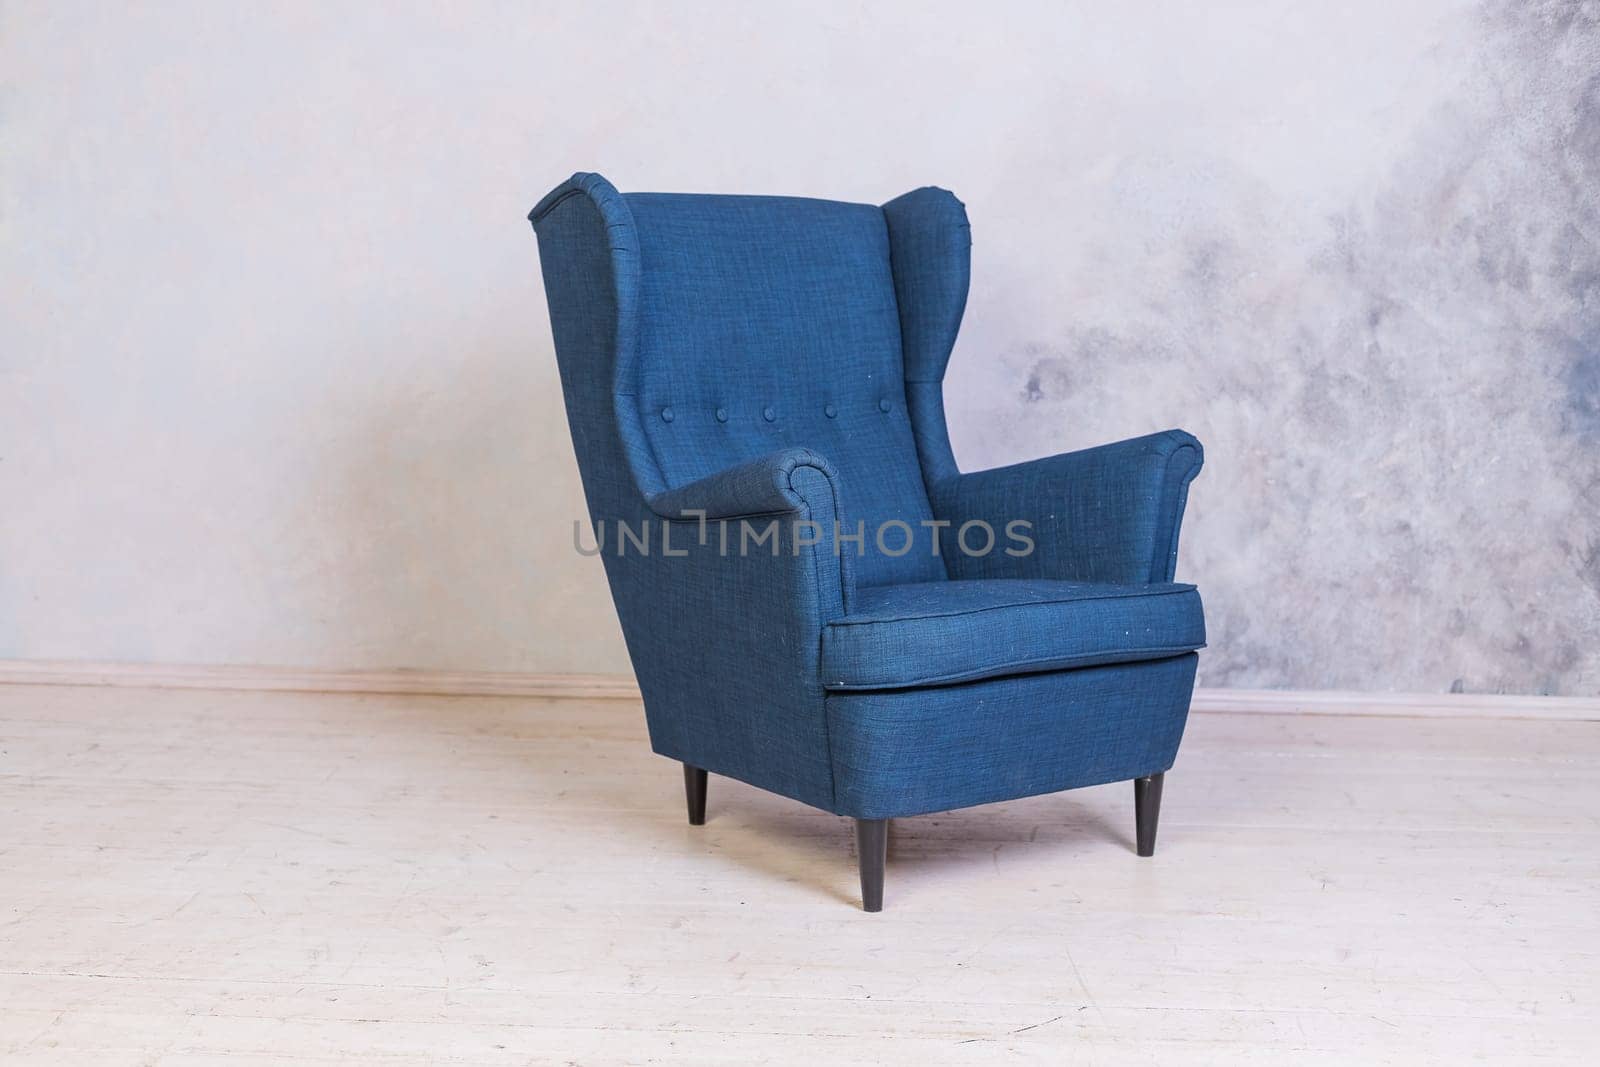 Classic blue chair on white wall background with swirl decorations. Studio interior.